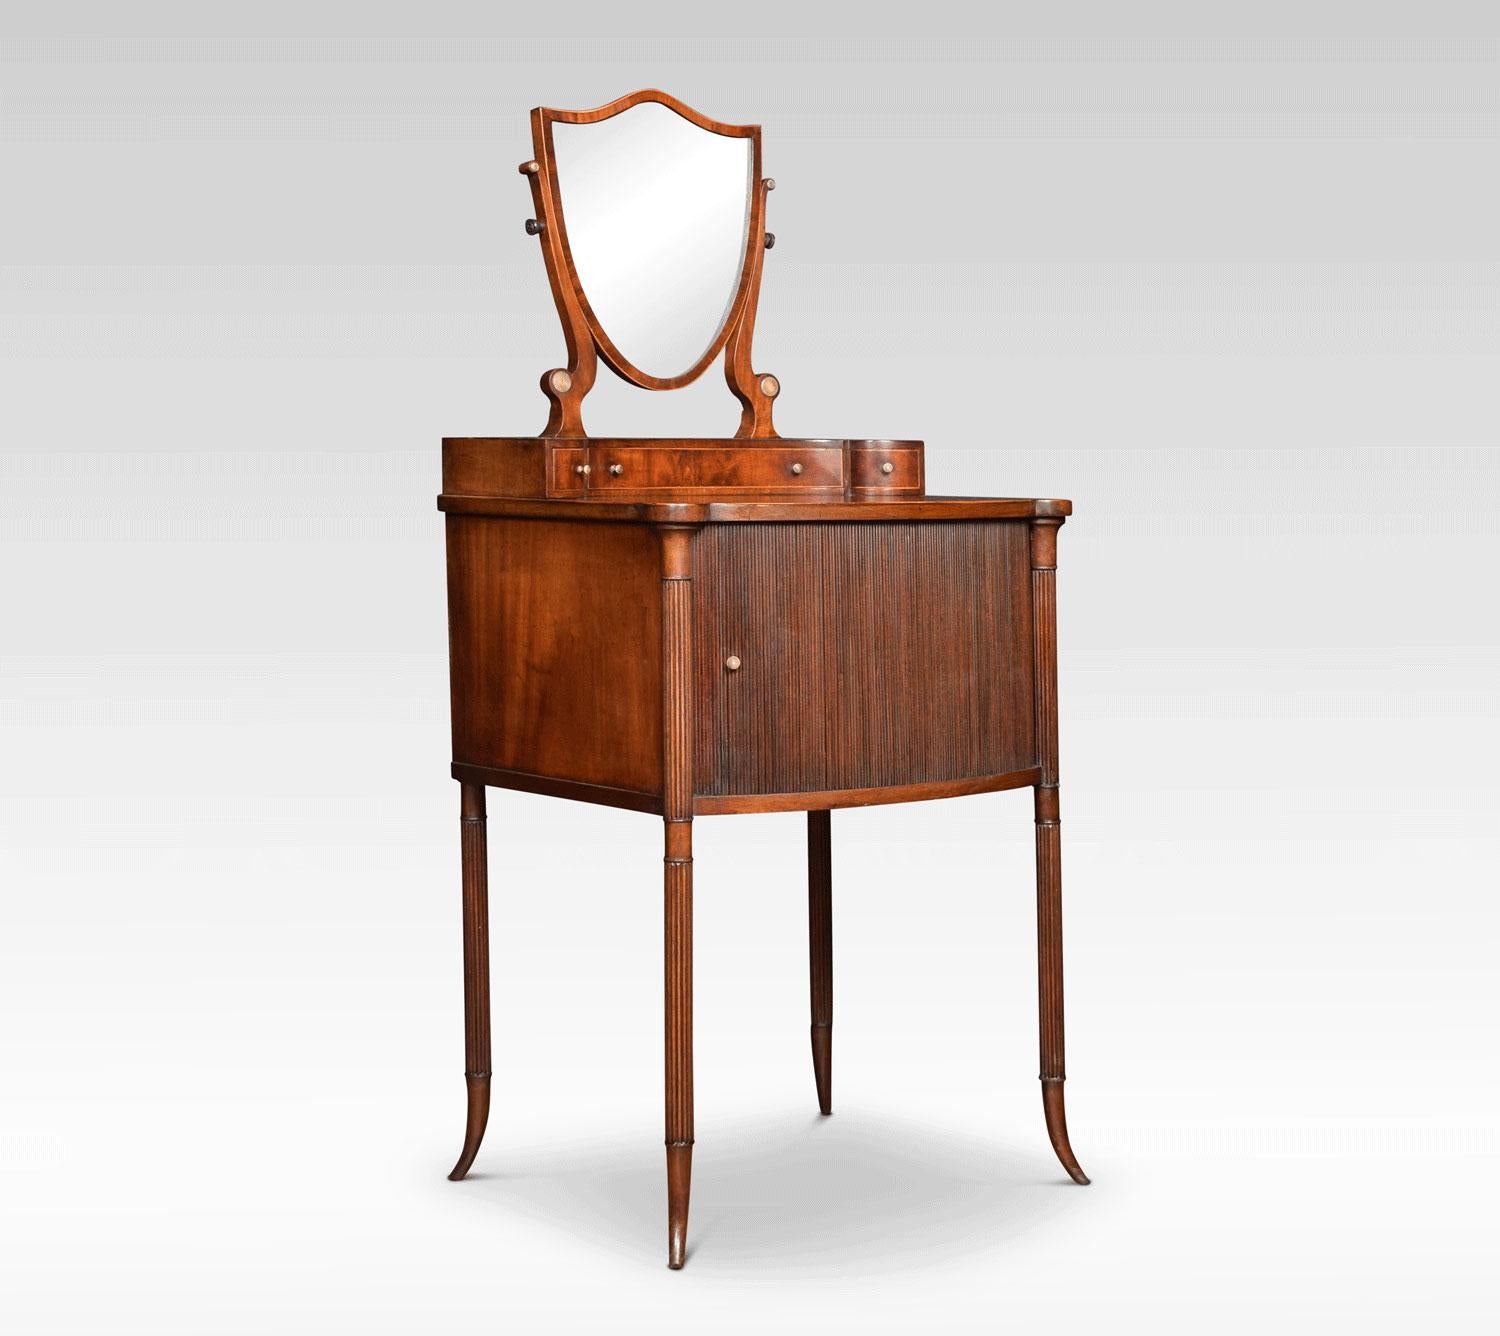 Regency mahogany dressing table the raised shield shaped mirror supported on slender supports having an arrangement of short draws below. The shaped moulded top above unusual tambour front cupboard. All raised up on reeded legs terminating in